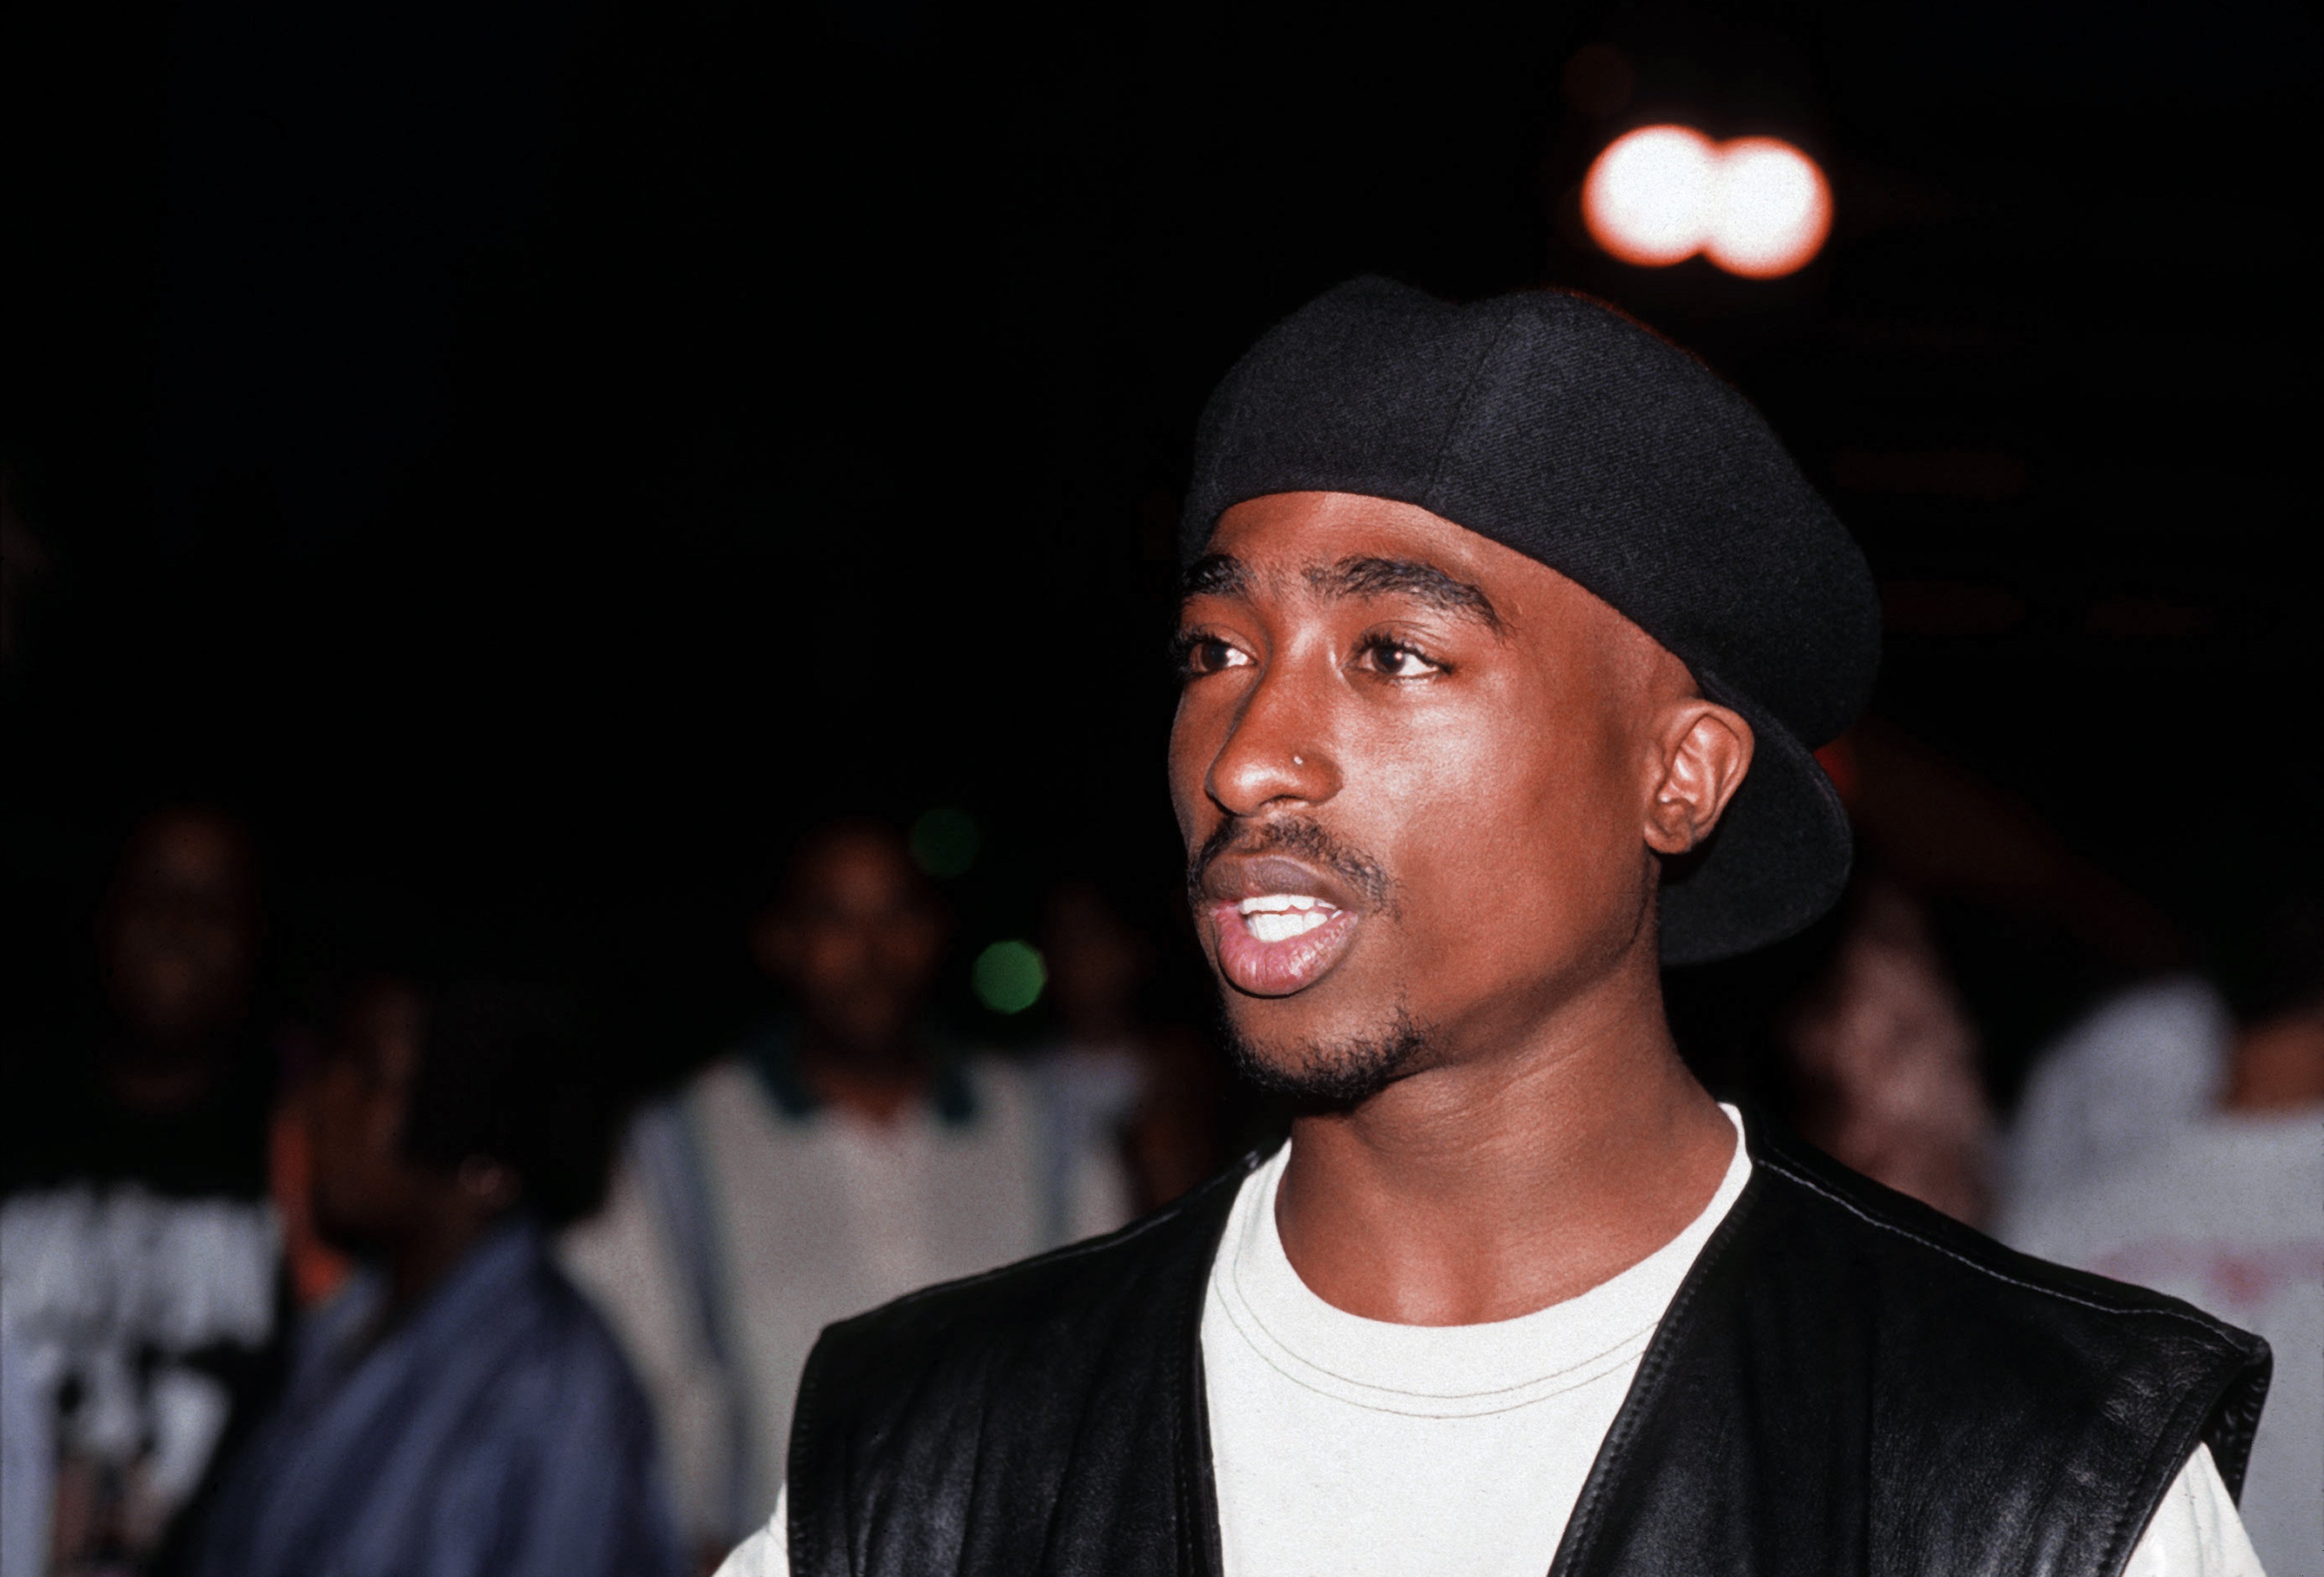 Tupac Shakur poses for a portrait at Club Amazon on July 23, 1993, in New York | Source: Getty Images